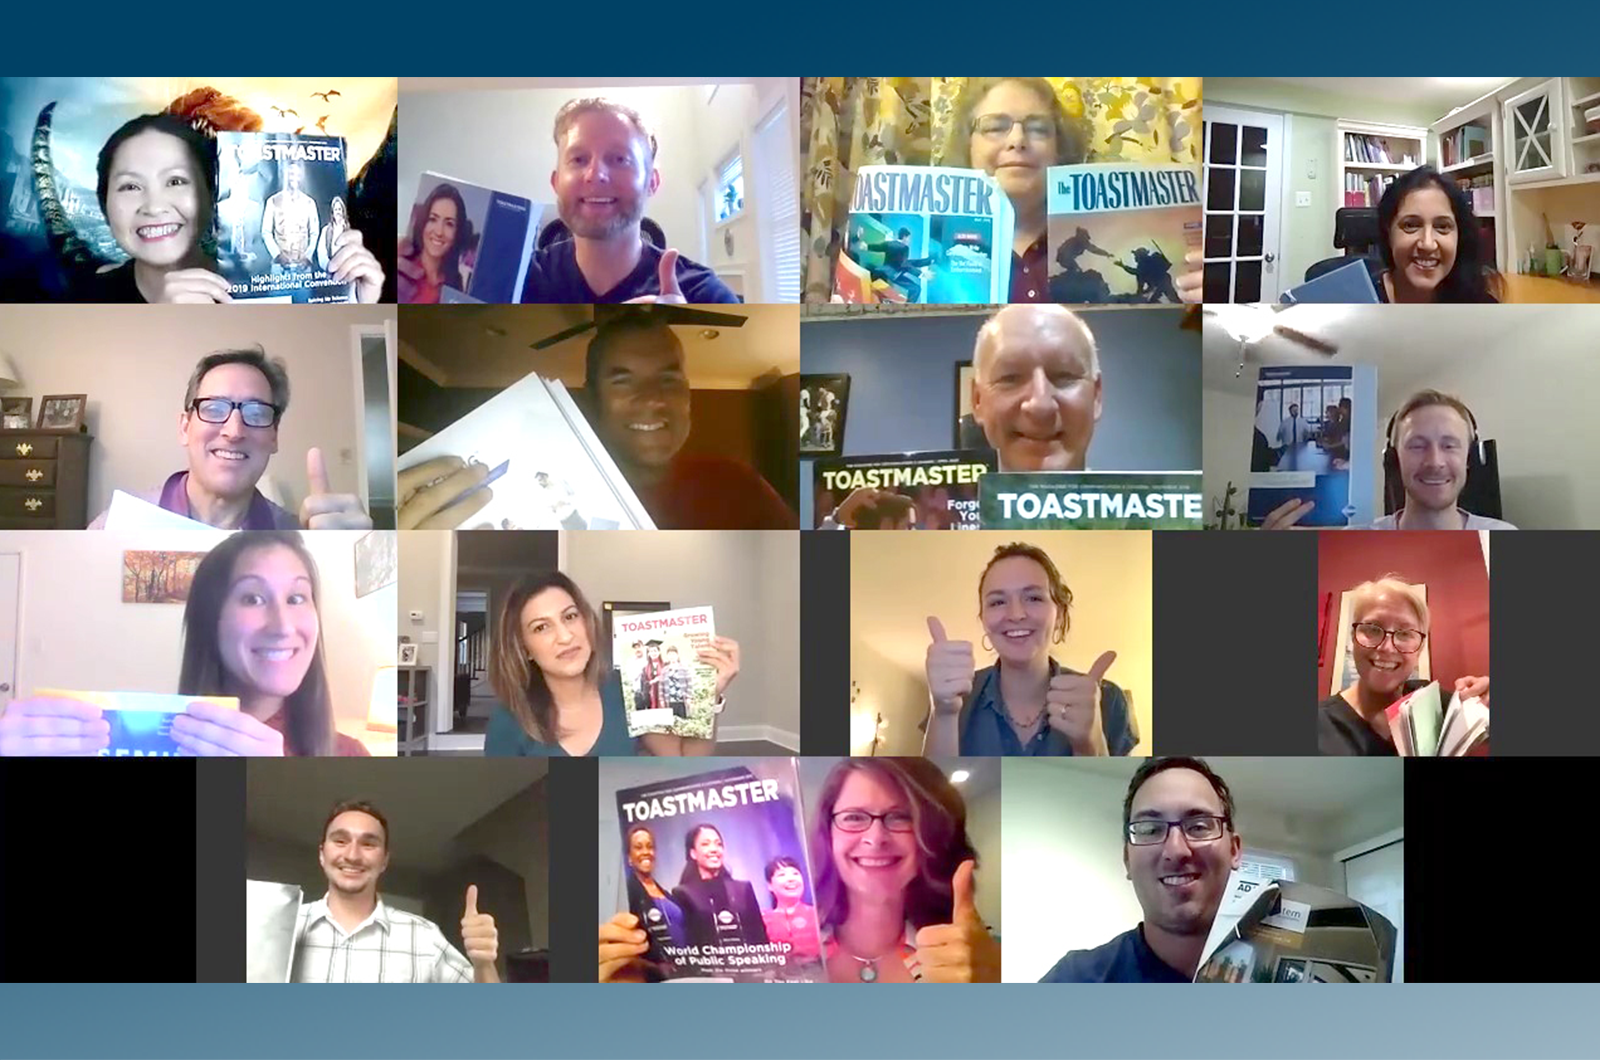 Group of people on Zoom call holding up Toastmaster magazines